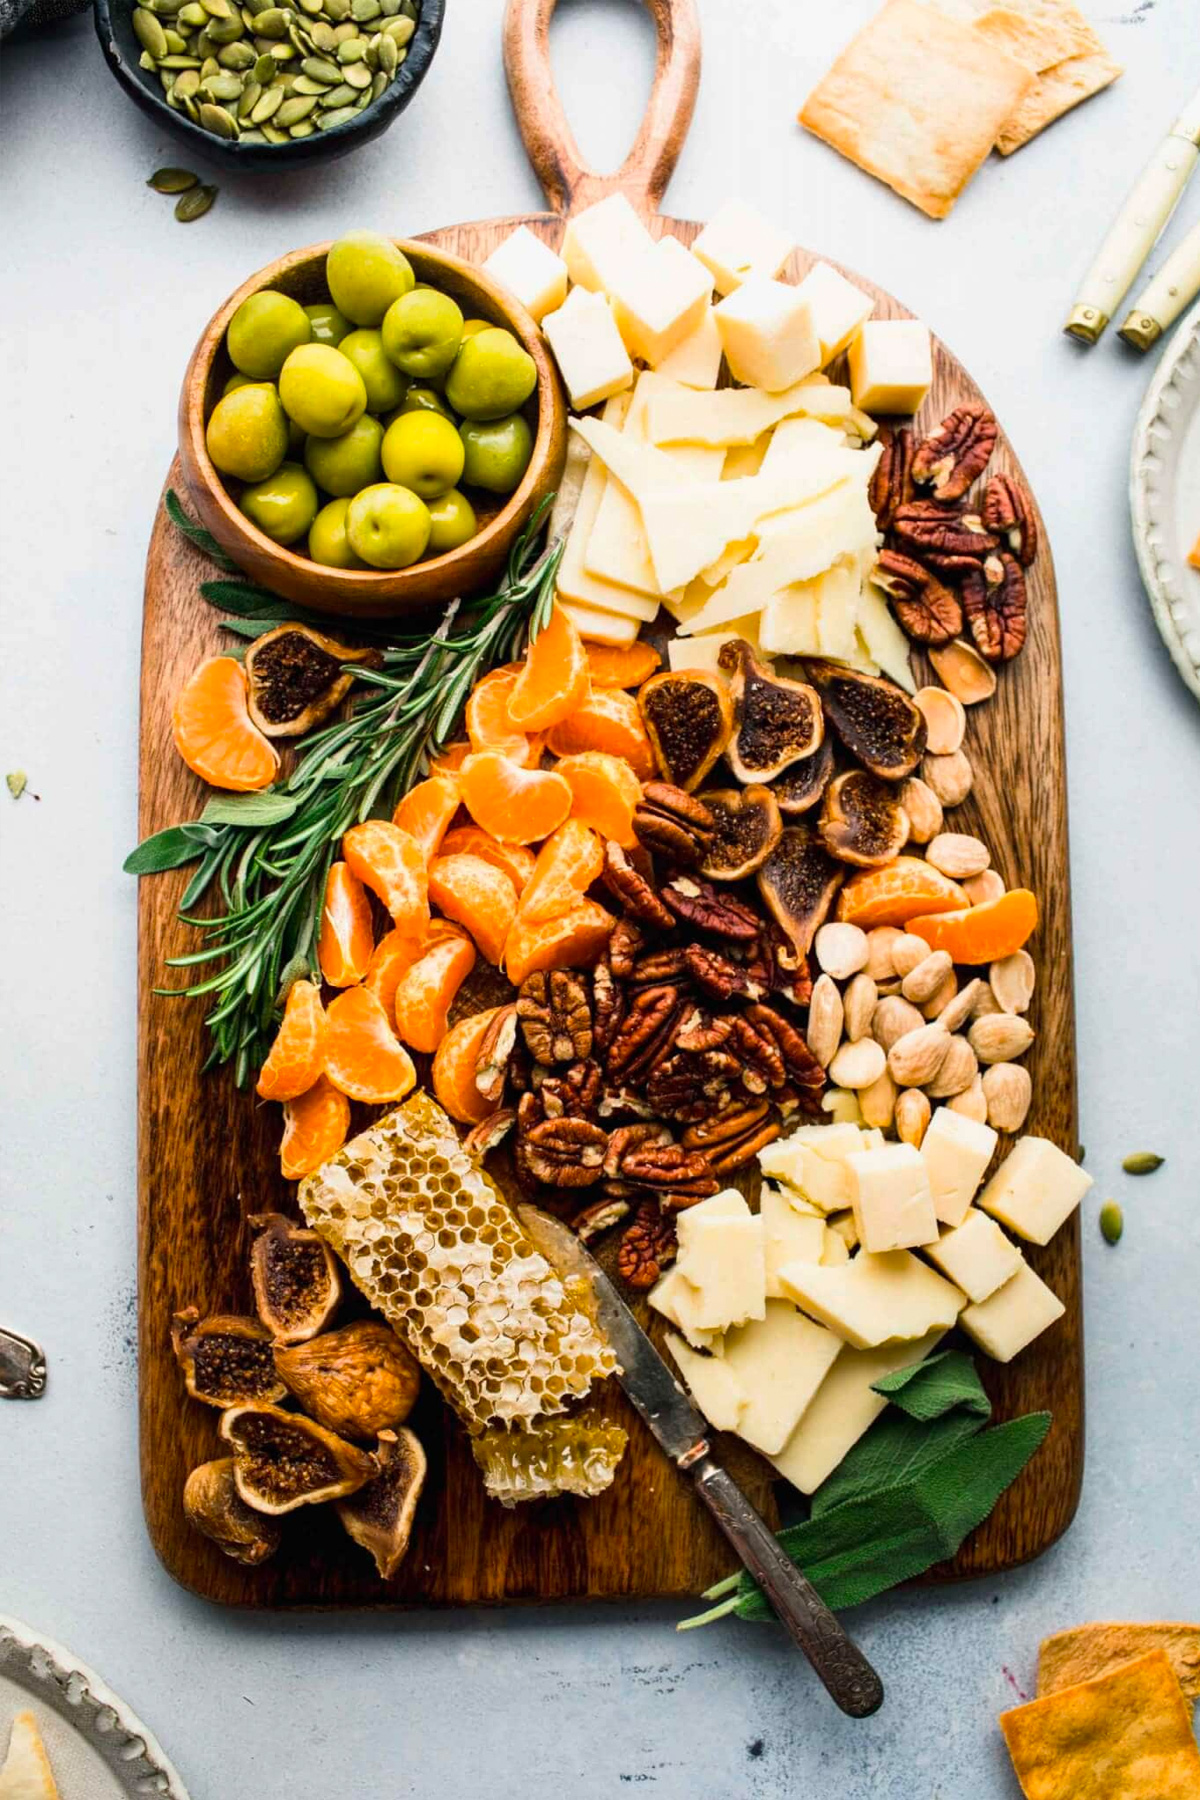 Nuts, cheese, clementine's, honey comb,  and figs are included on Platings and Pairings winter cheese board.